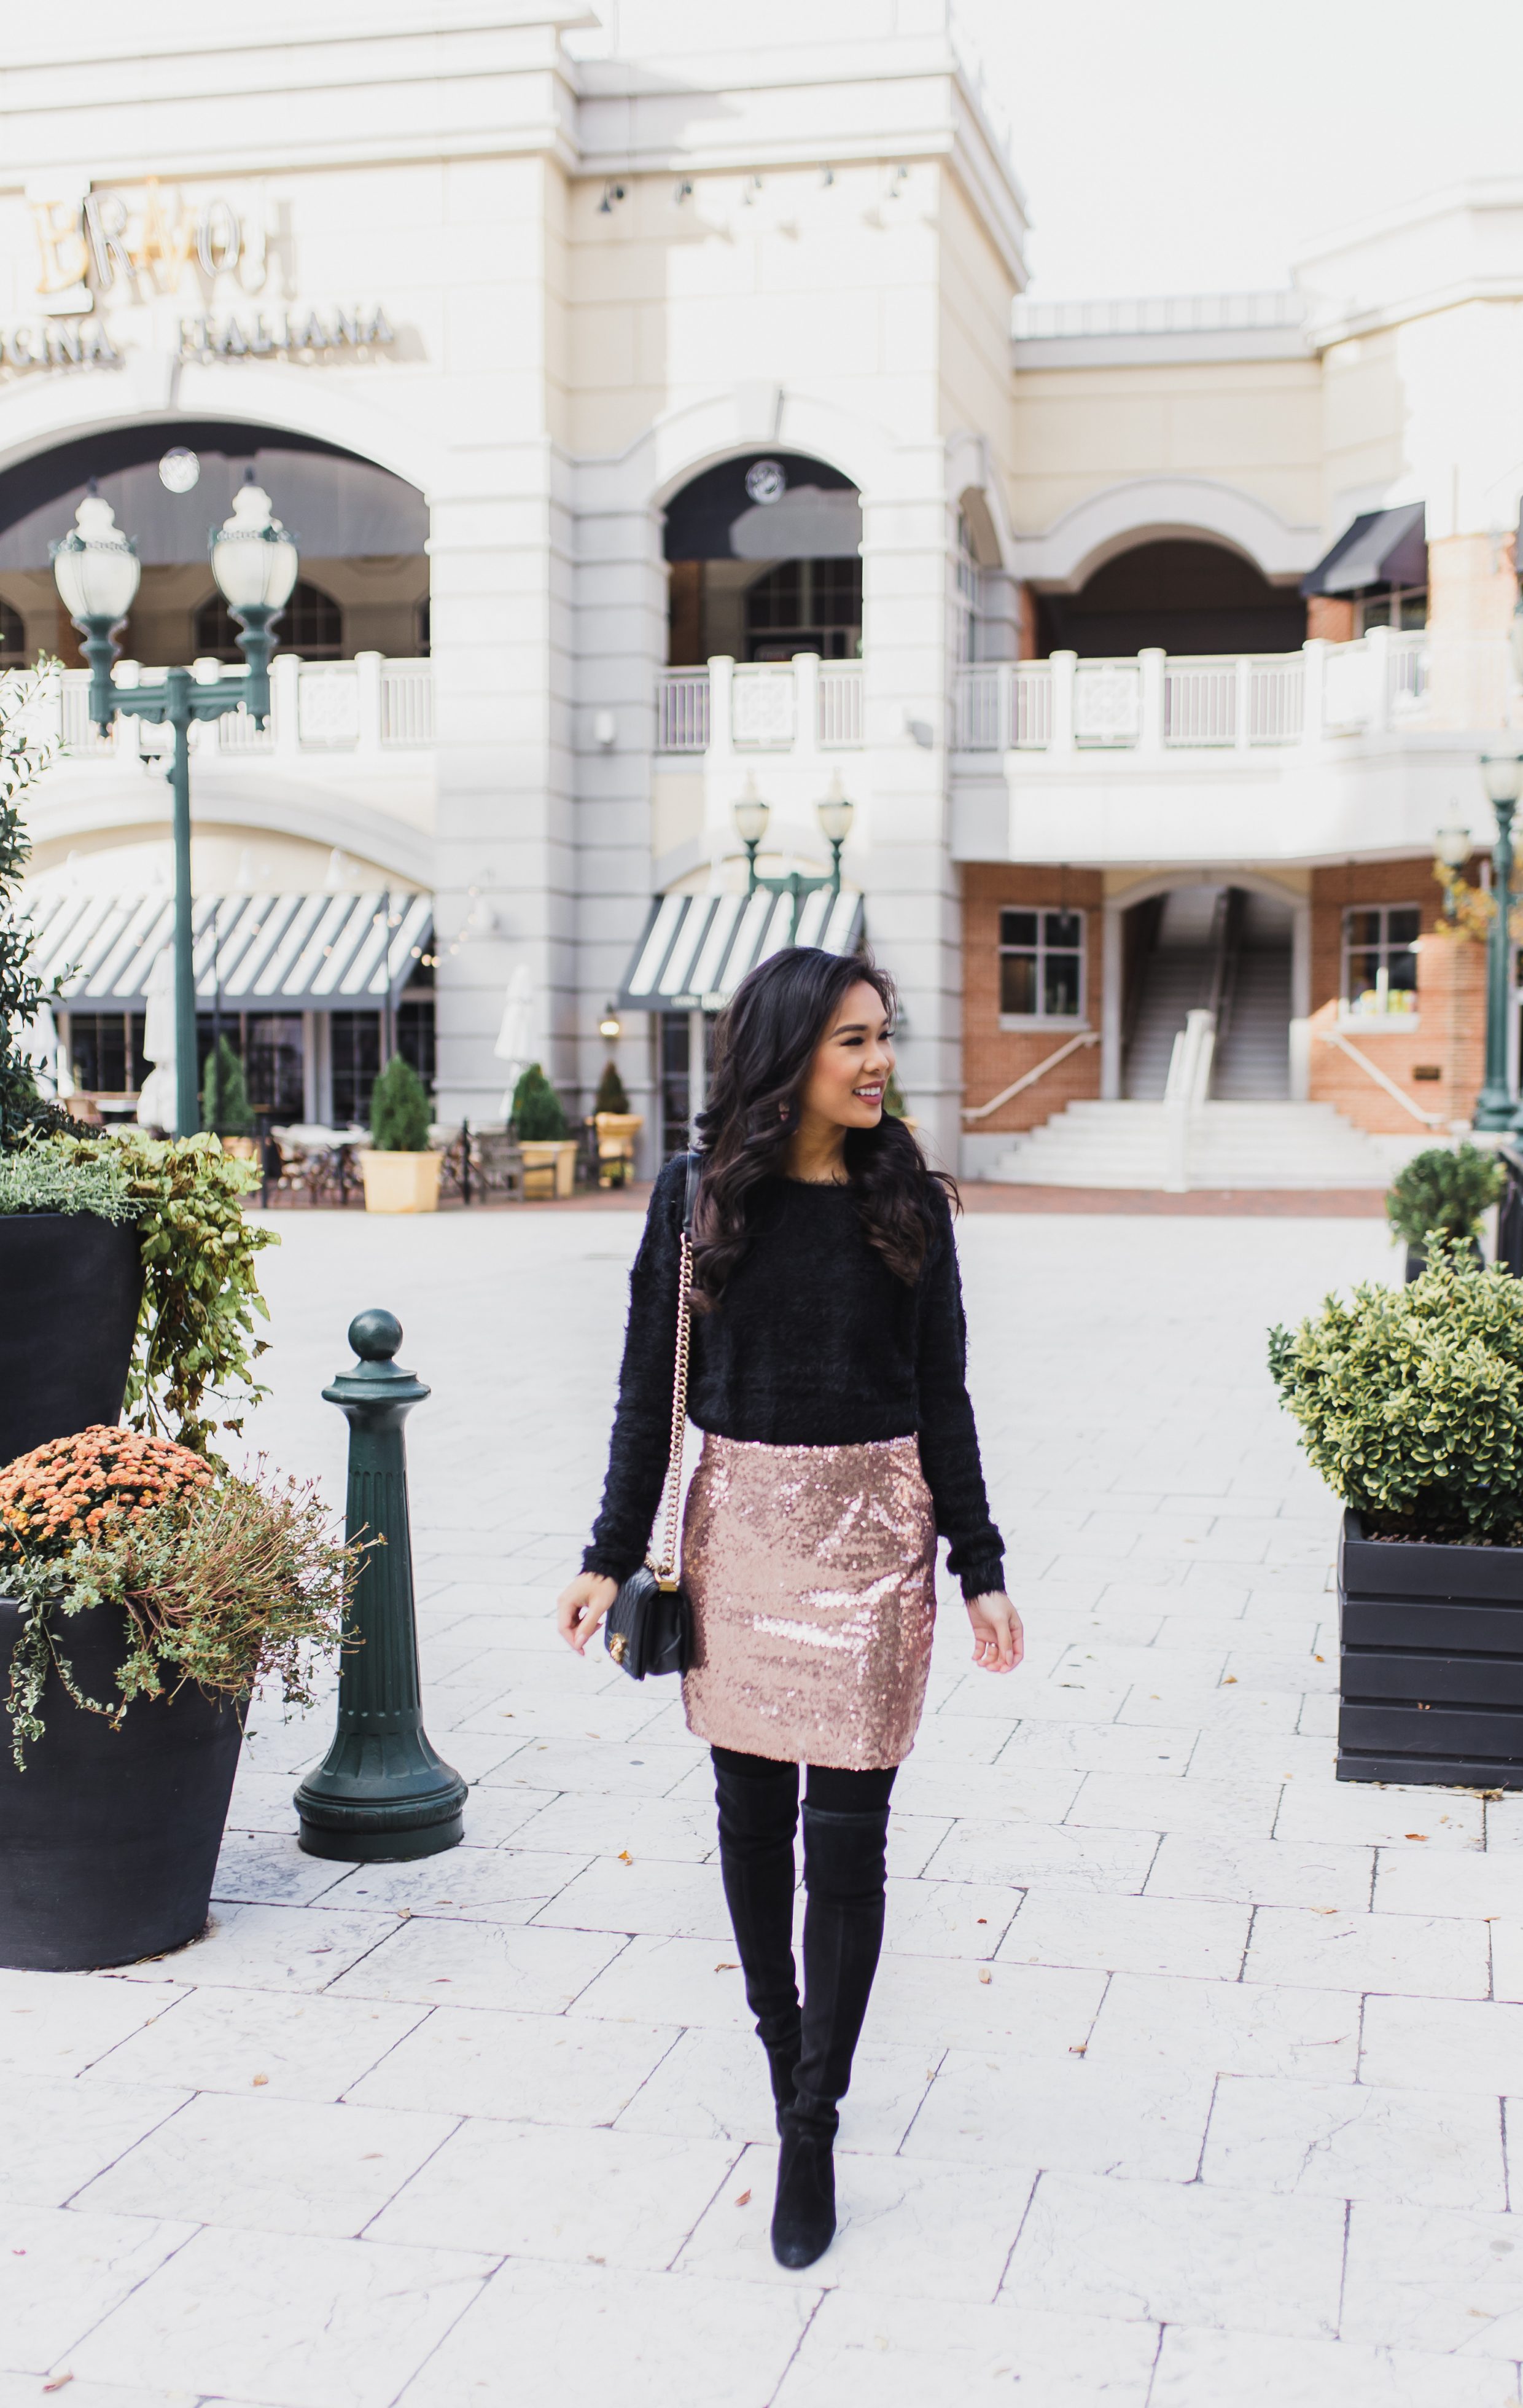 sequin skirt with sweater